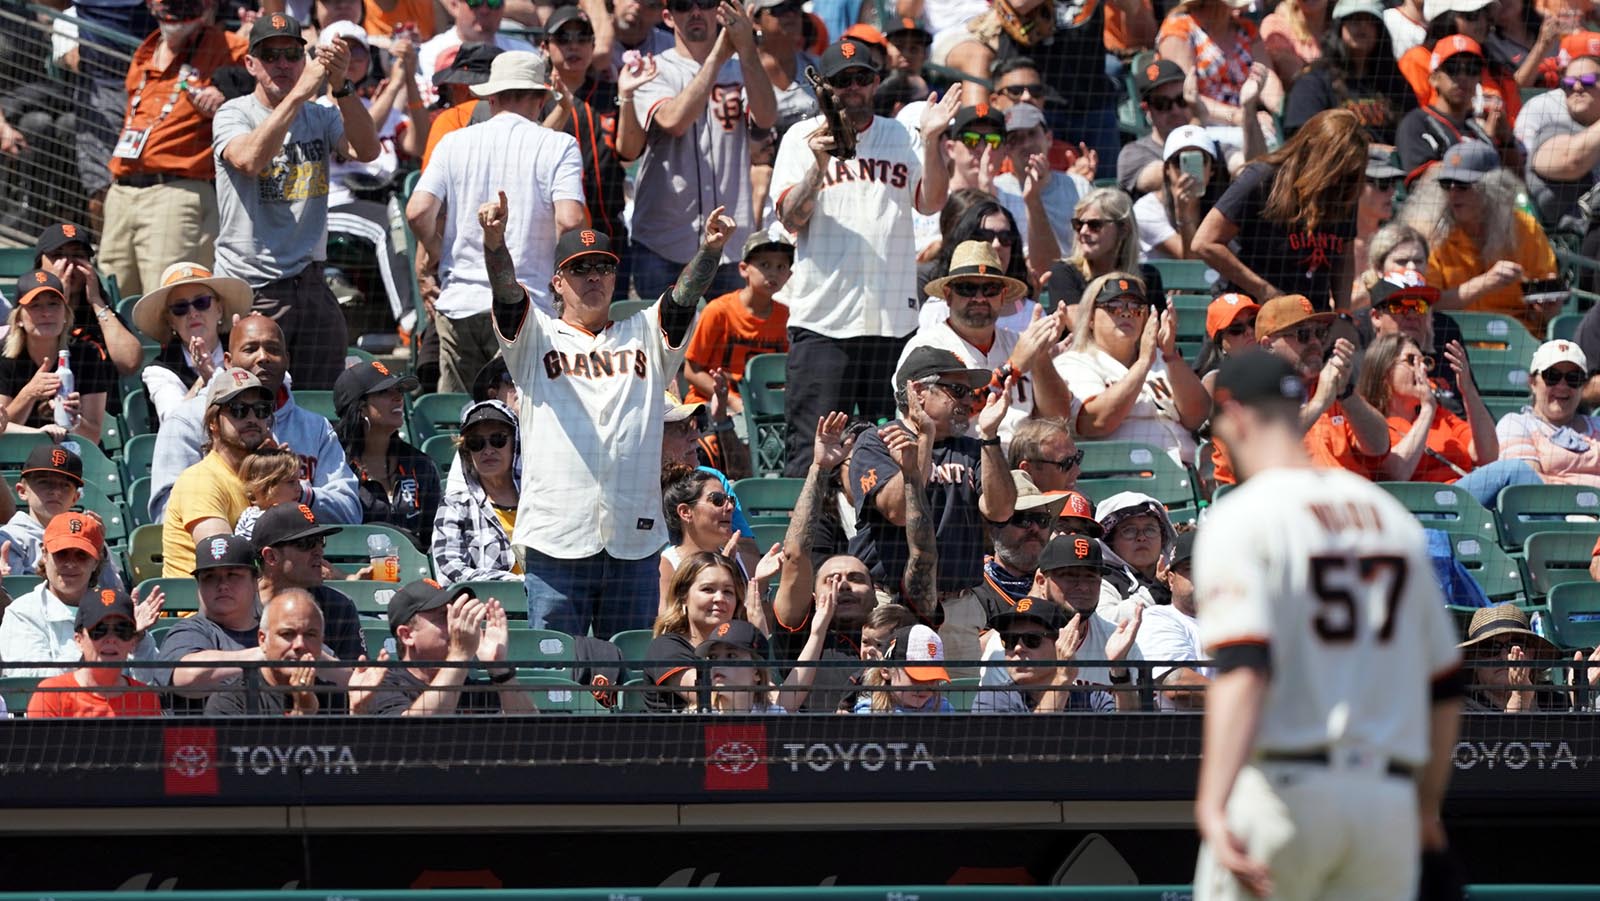 Have the San Francisco Giants been “clutch” to start the season